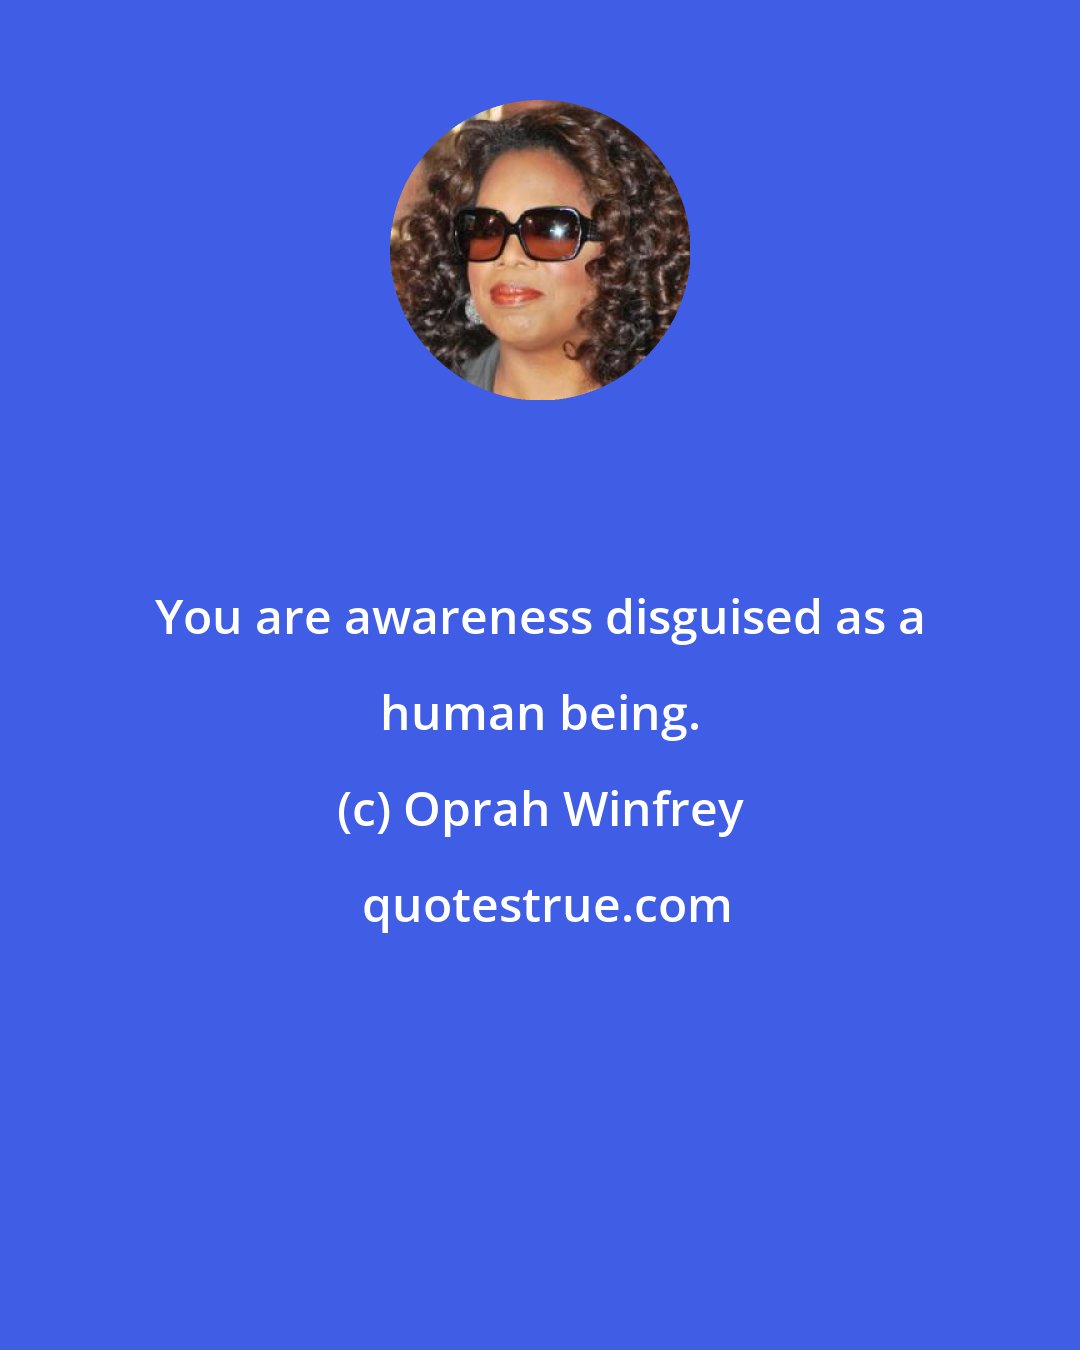 Oprah Winfrey: You are awareness disguised as a human being.